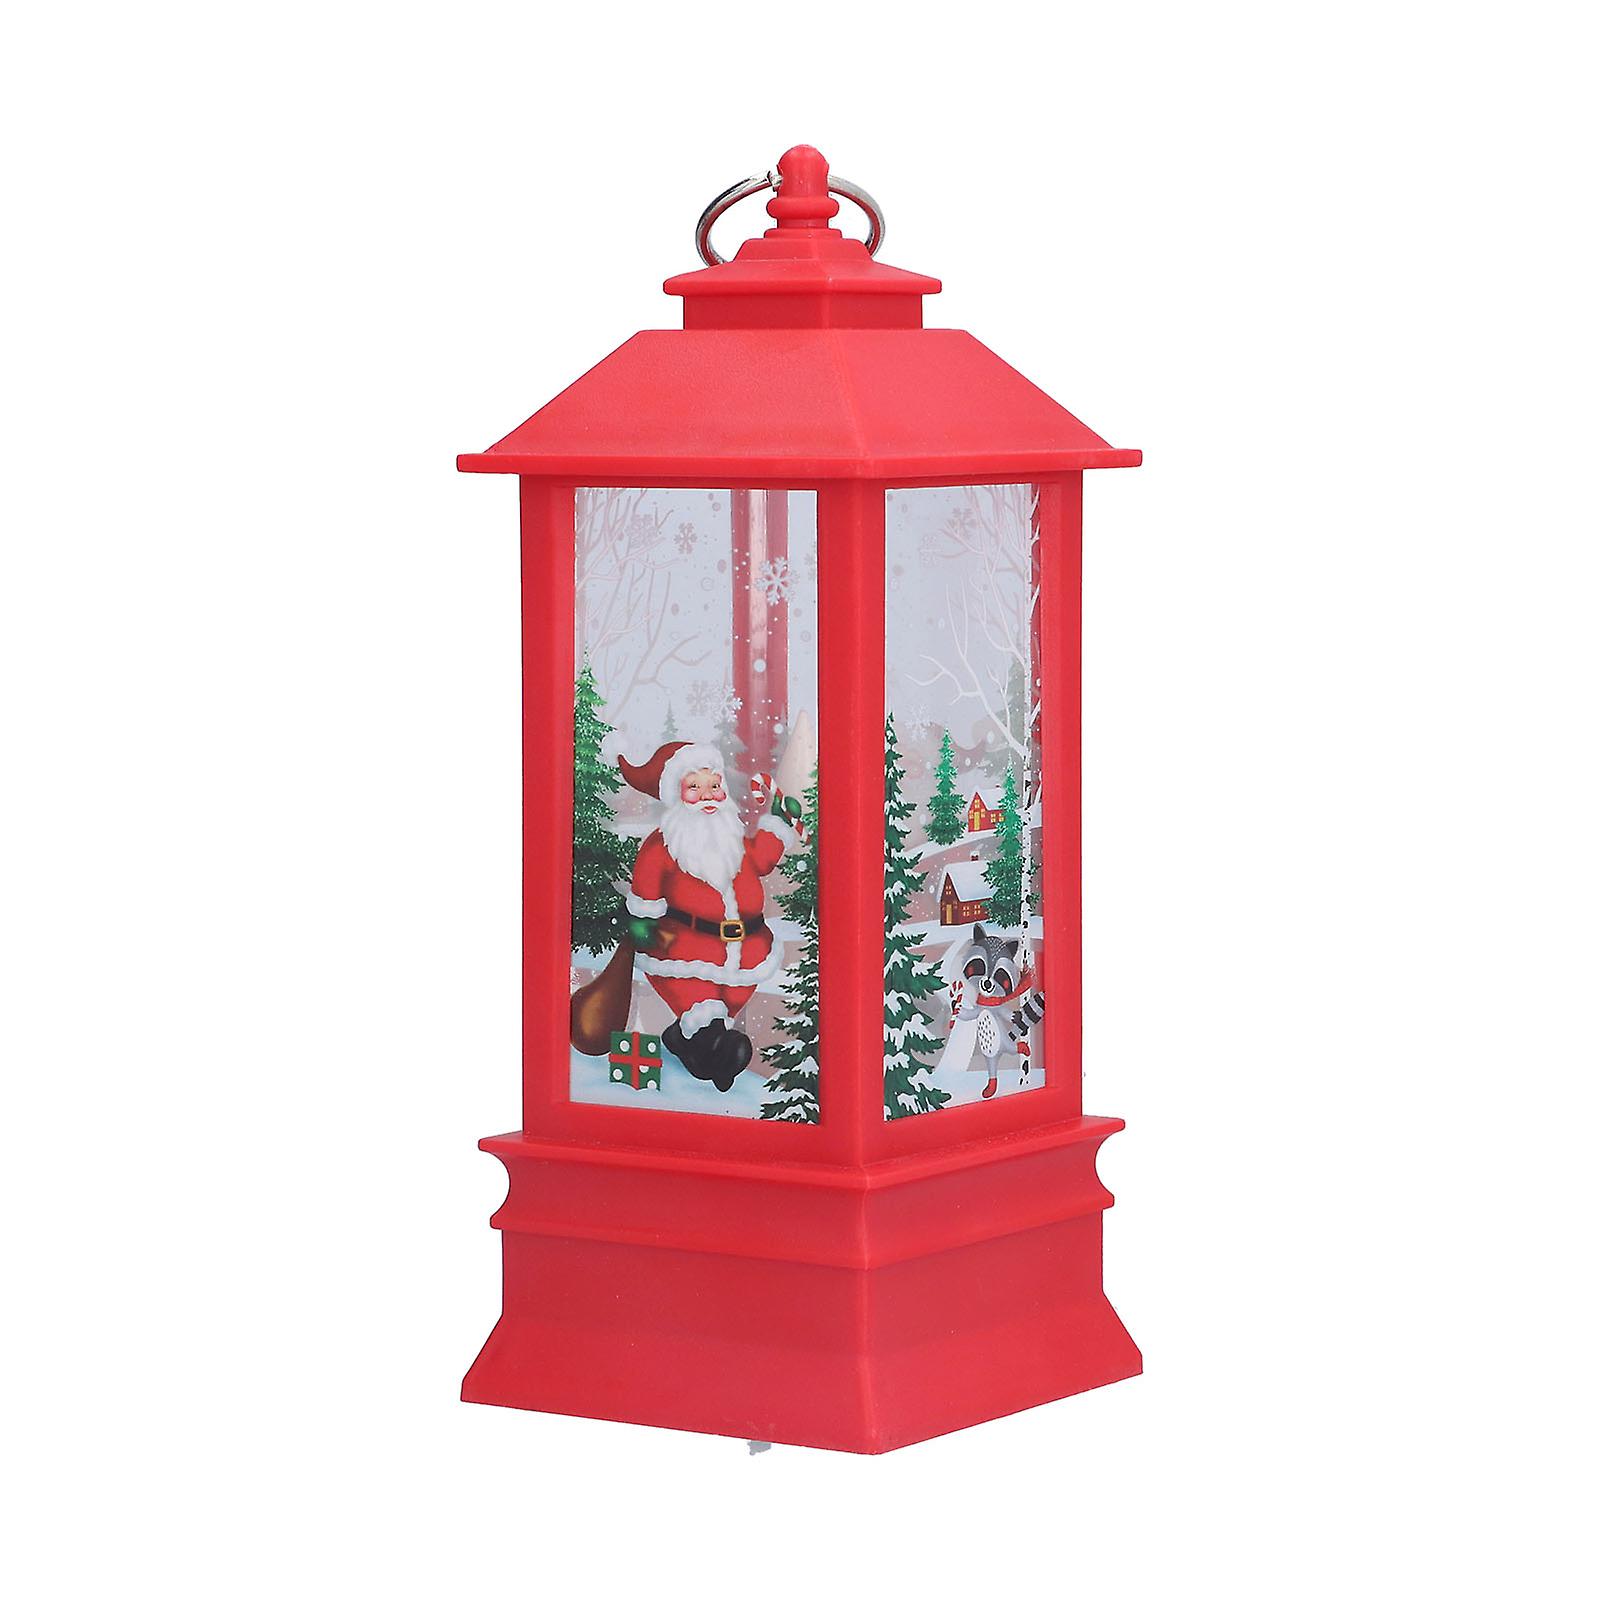 Christmas Lanterns Battery Powered Led Lighted Snowman Lanterns For Christmas Holiday Decorations